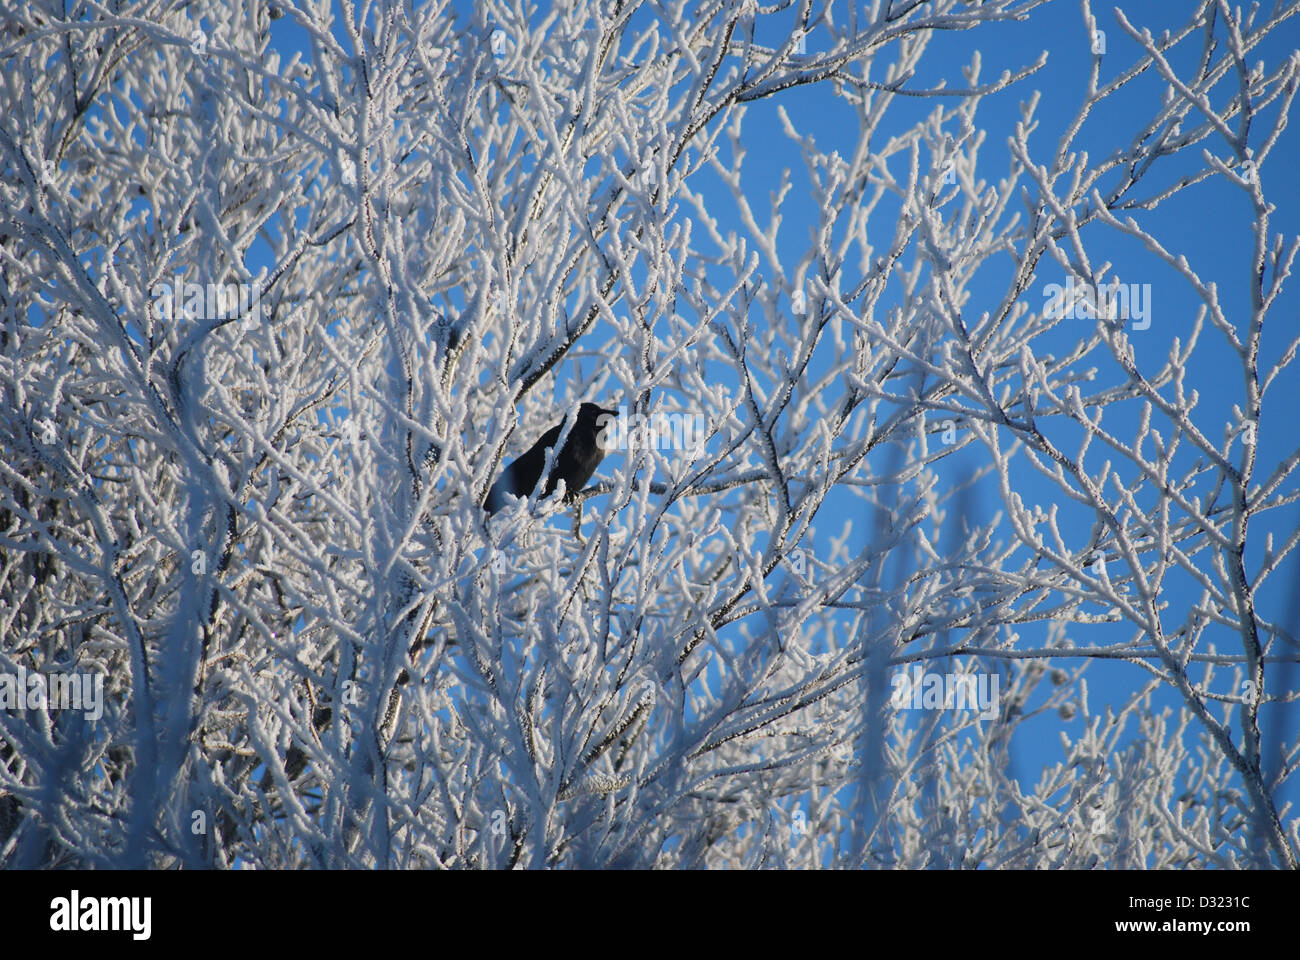 A snow covered tree in winter against a bright blue sky background with a crown raven jackdaw bird in the branches contrasting Stock Photo